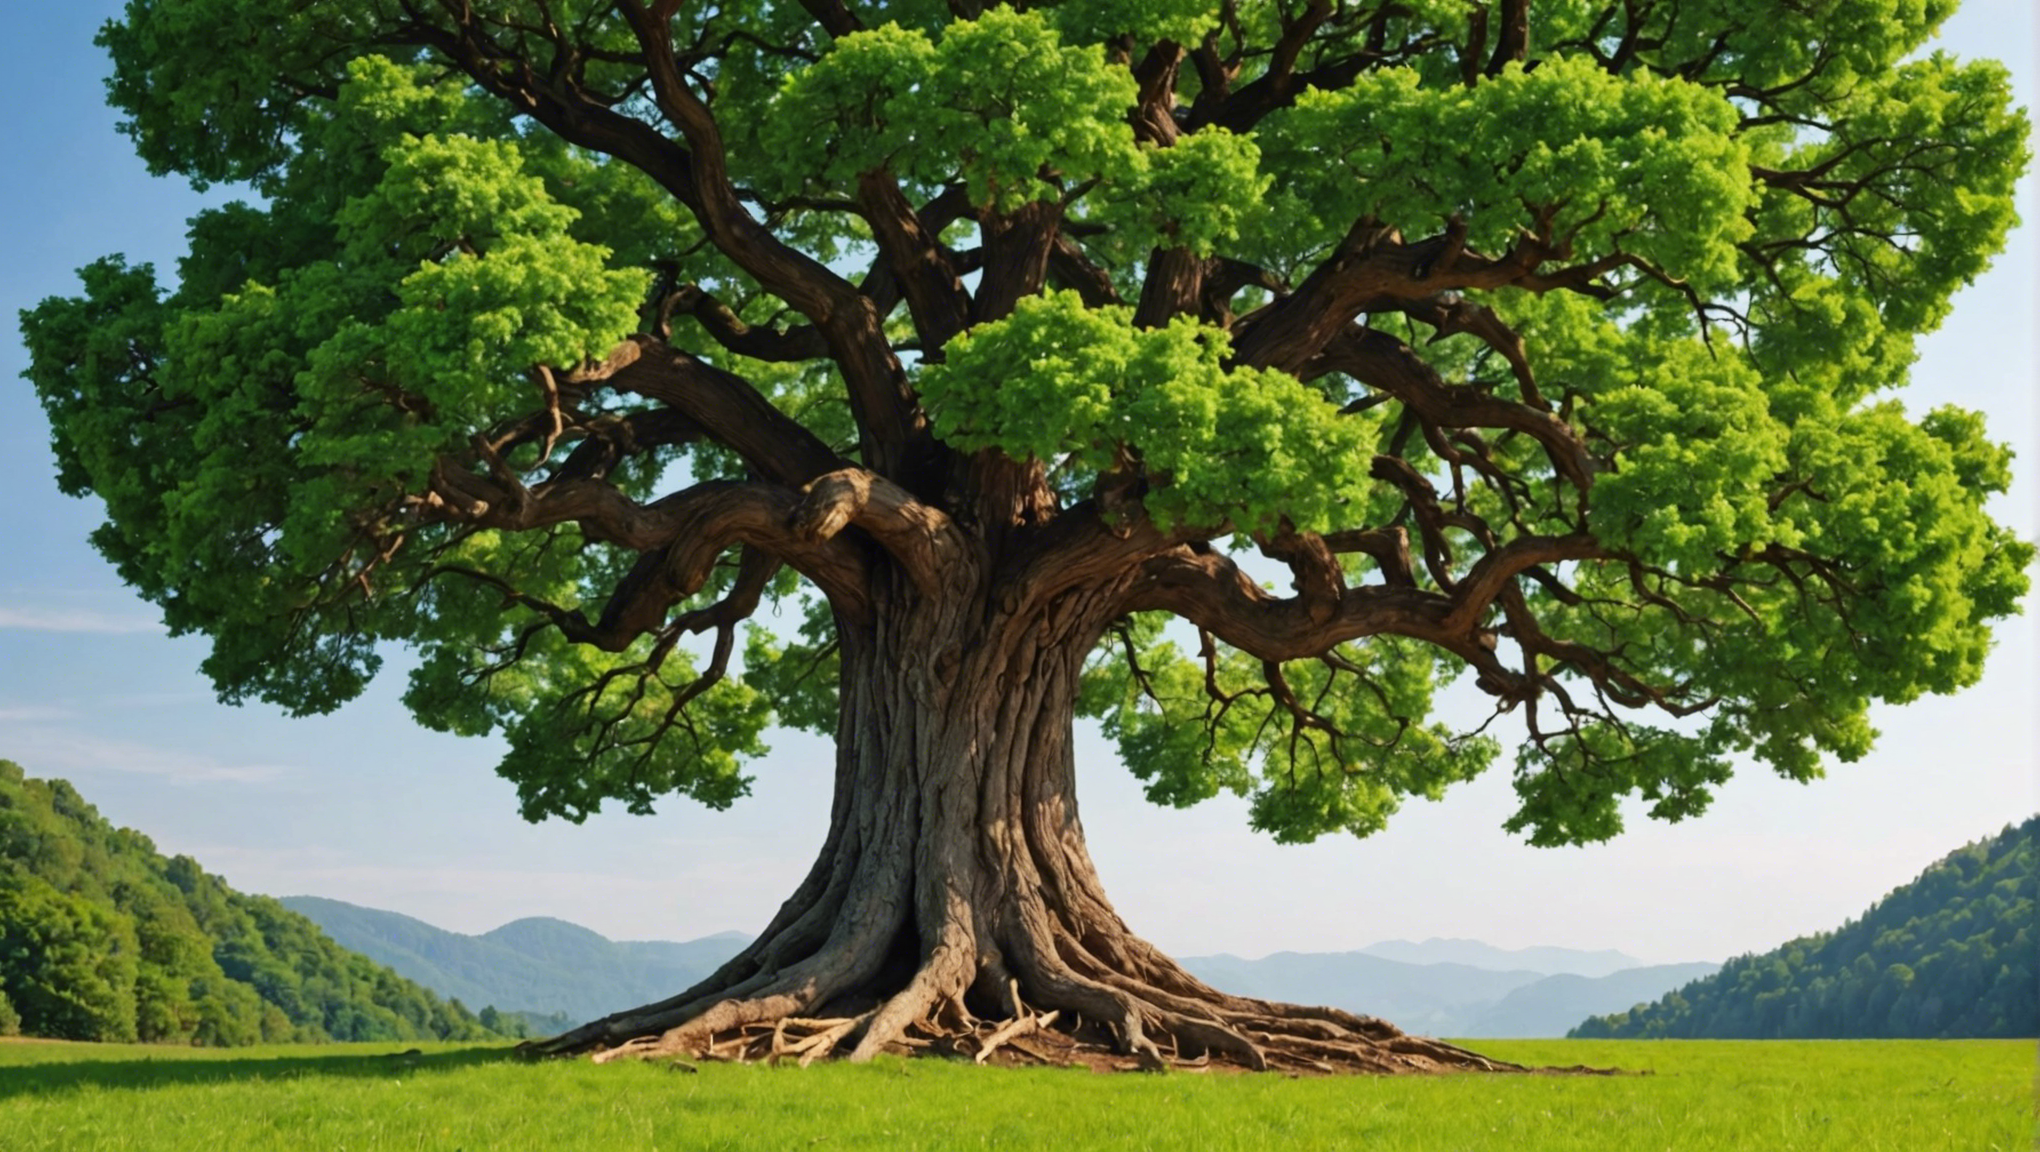 explore the significance of the tree as a symbol of life and resilience, and its cultural and spiritual importance in various traditions and societies.